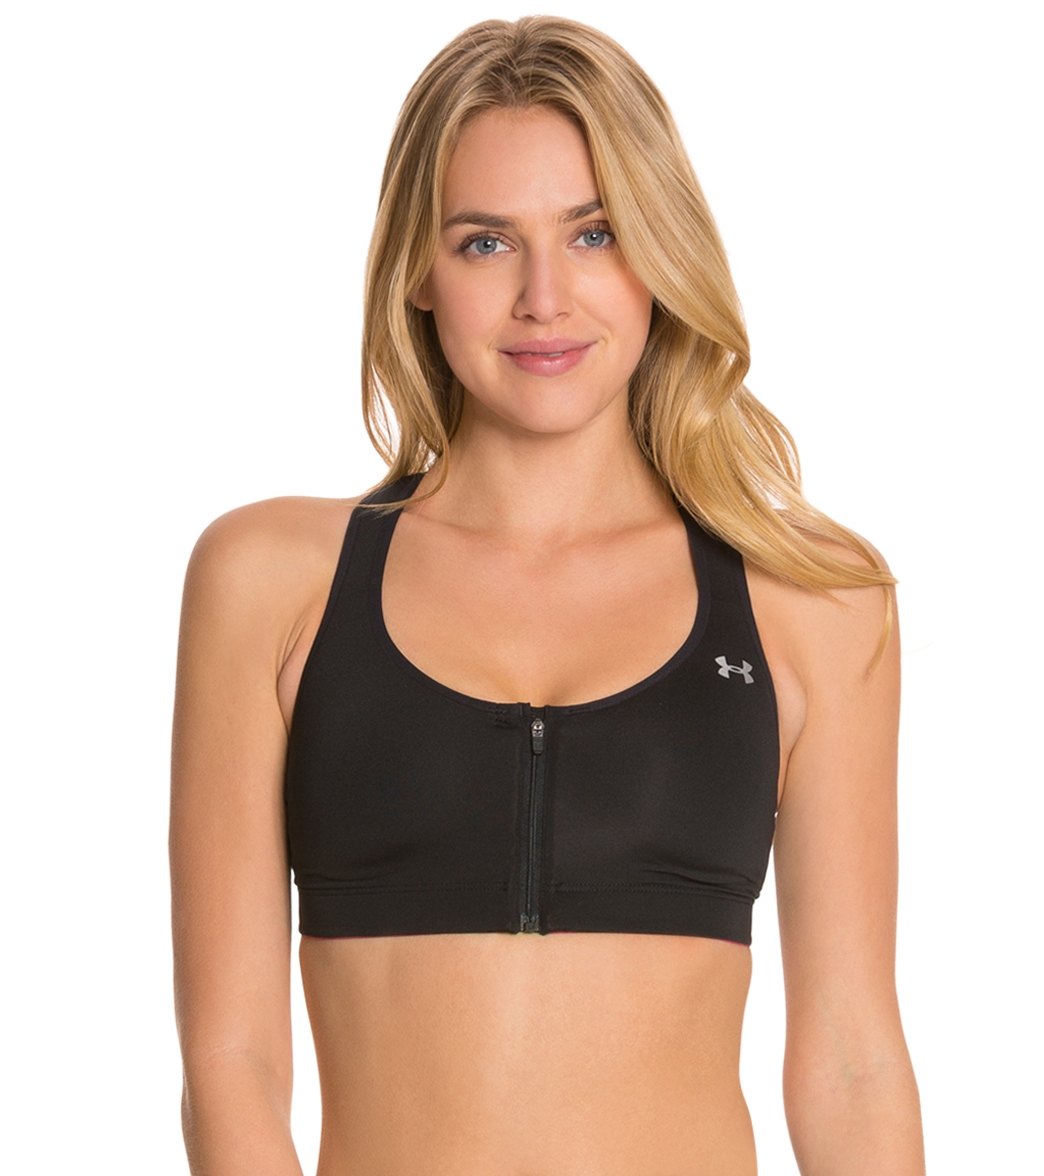 Under Armour Women's Protegee DD Sports Bra at